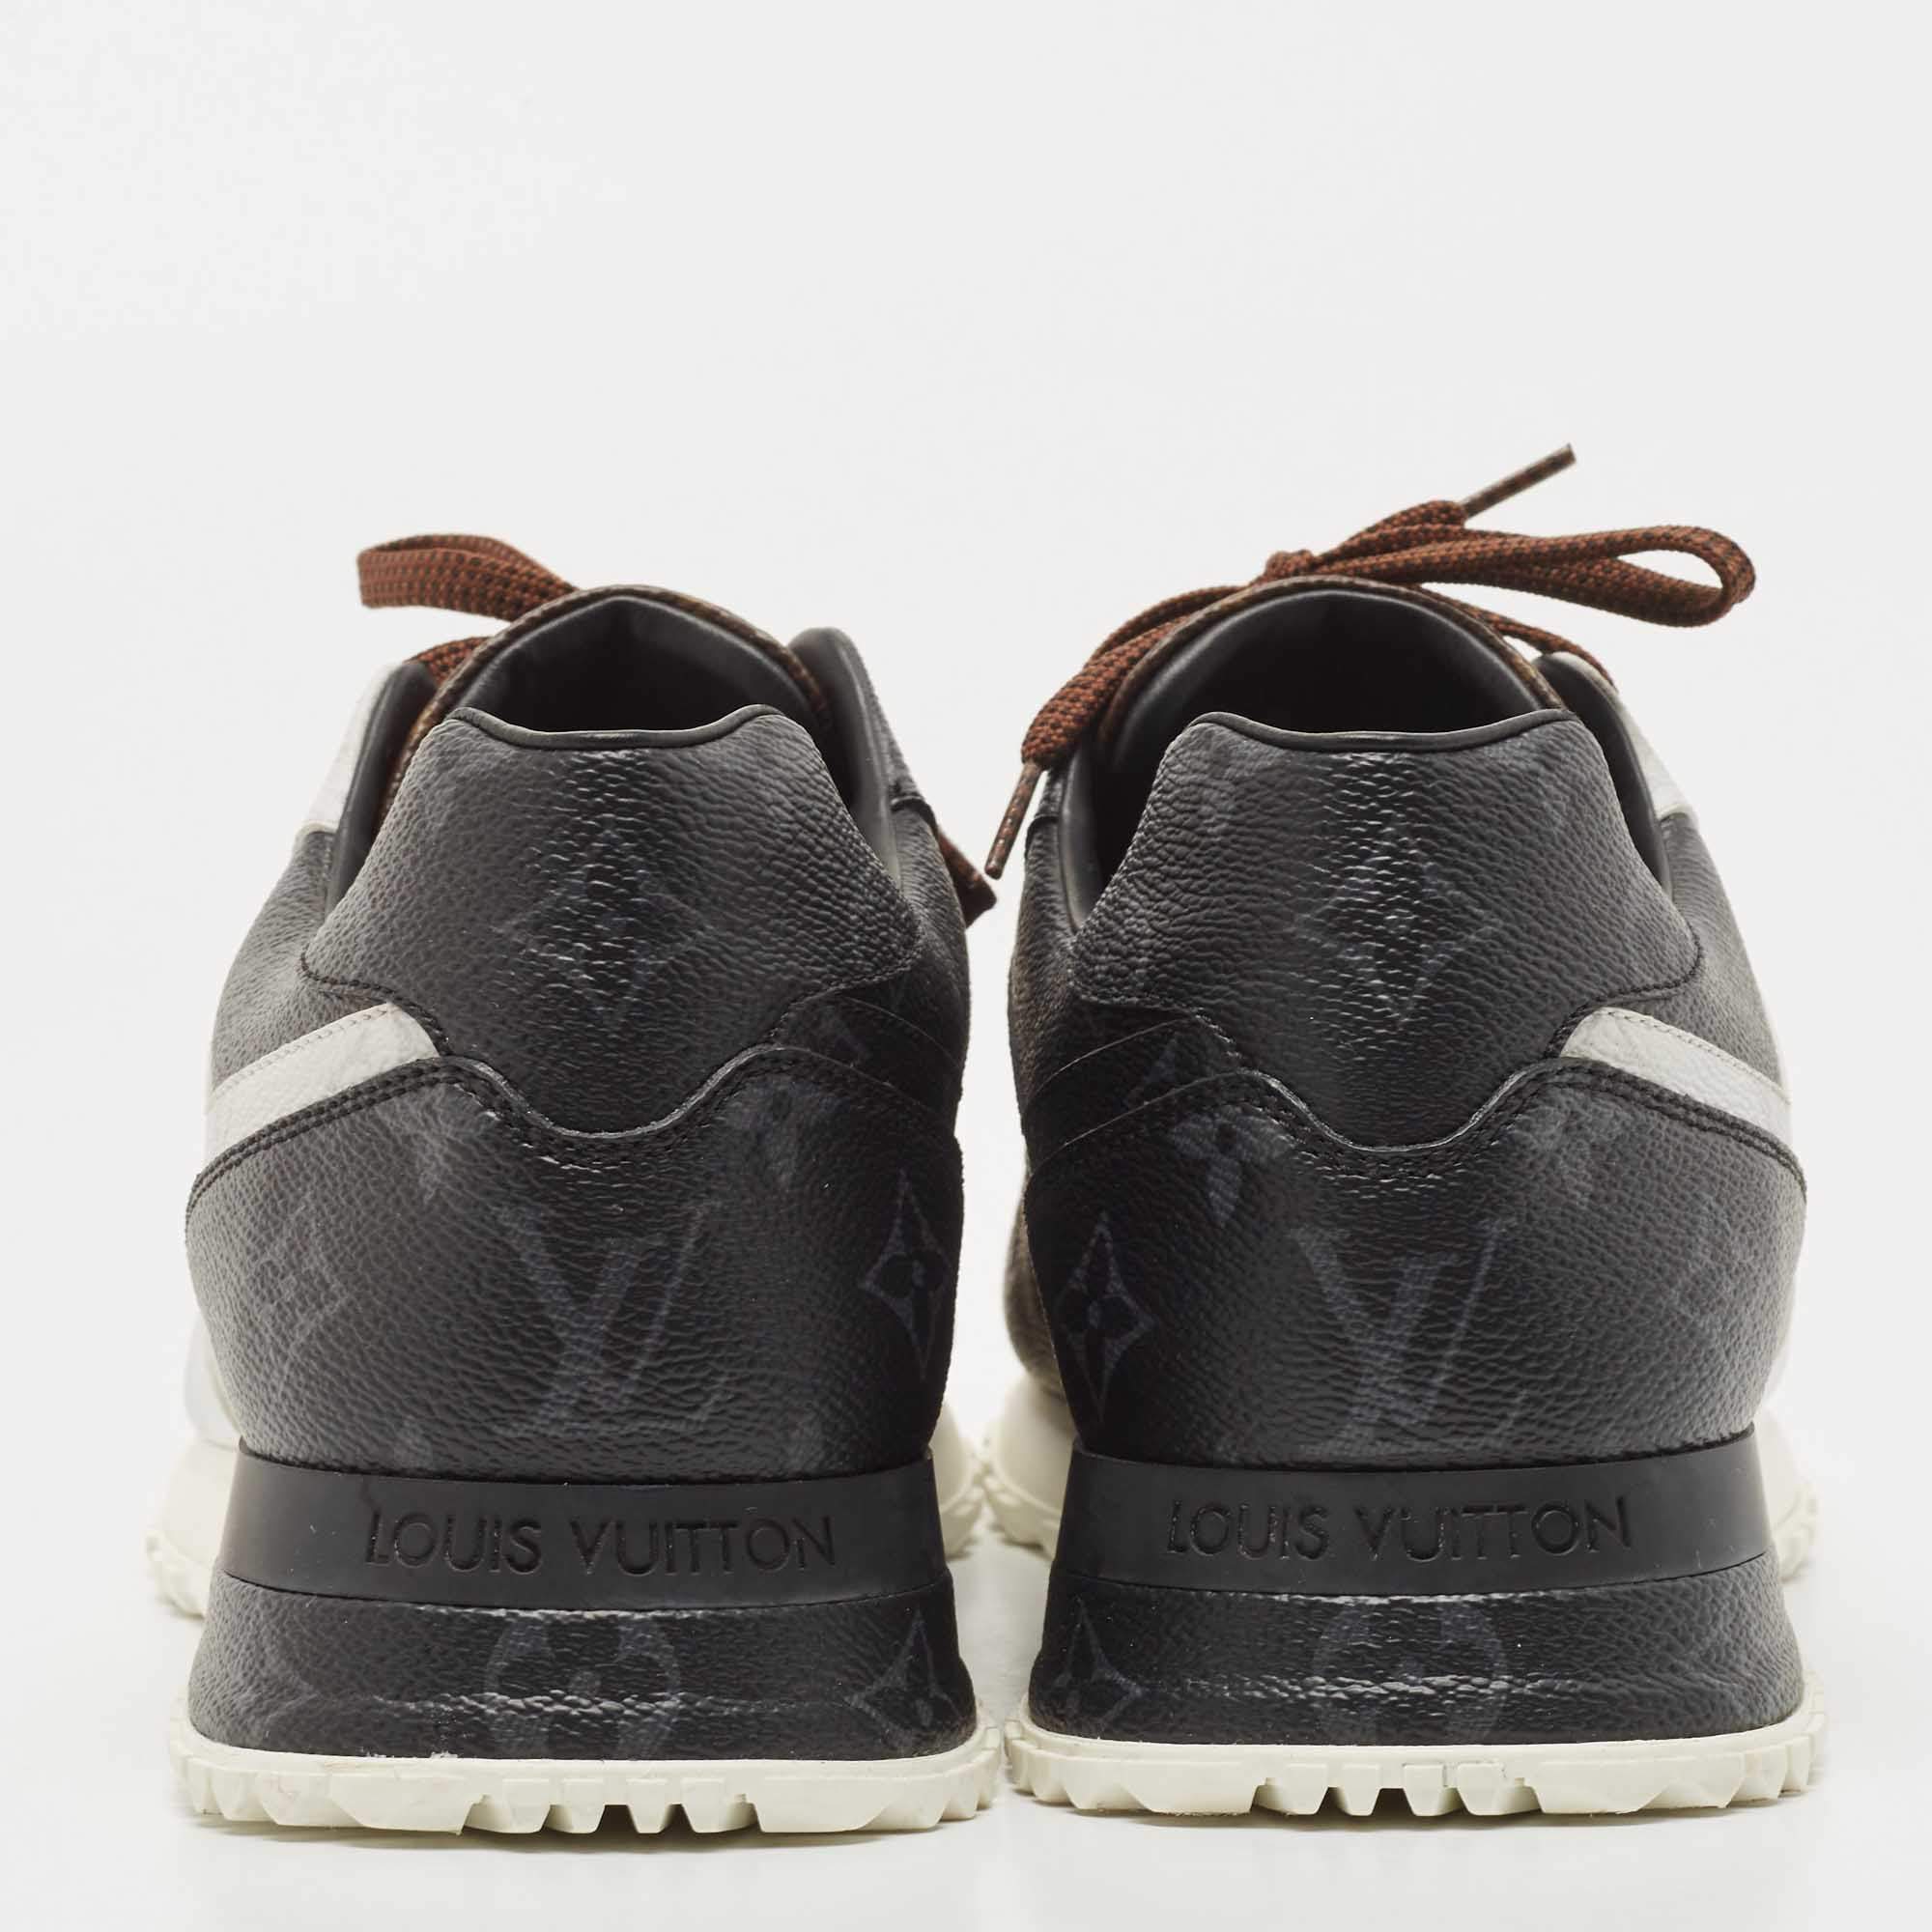 Run away leather low trainers Louis Vuitton Brown size 42.5 EU in Leather -  34029762